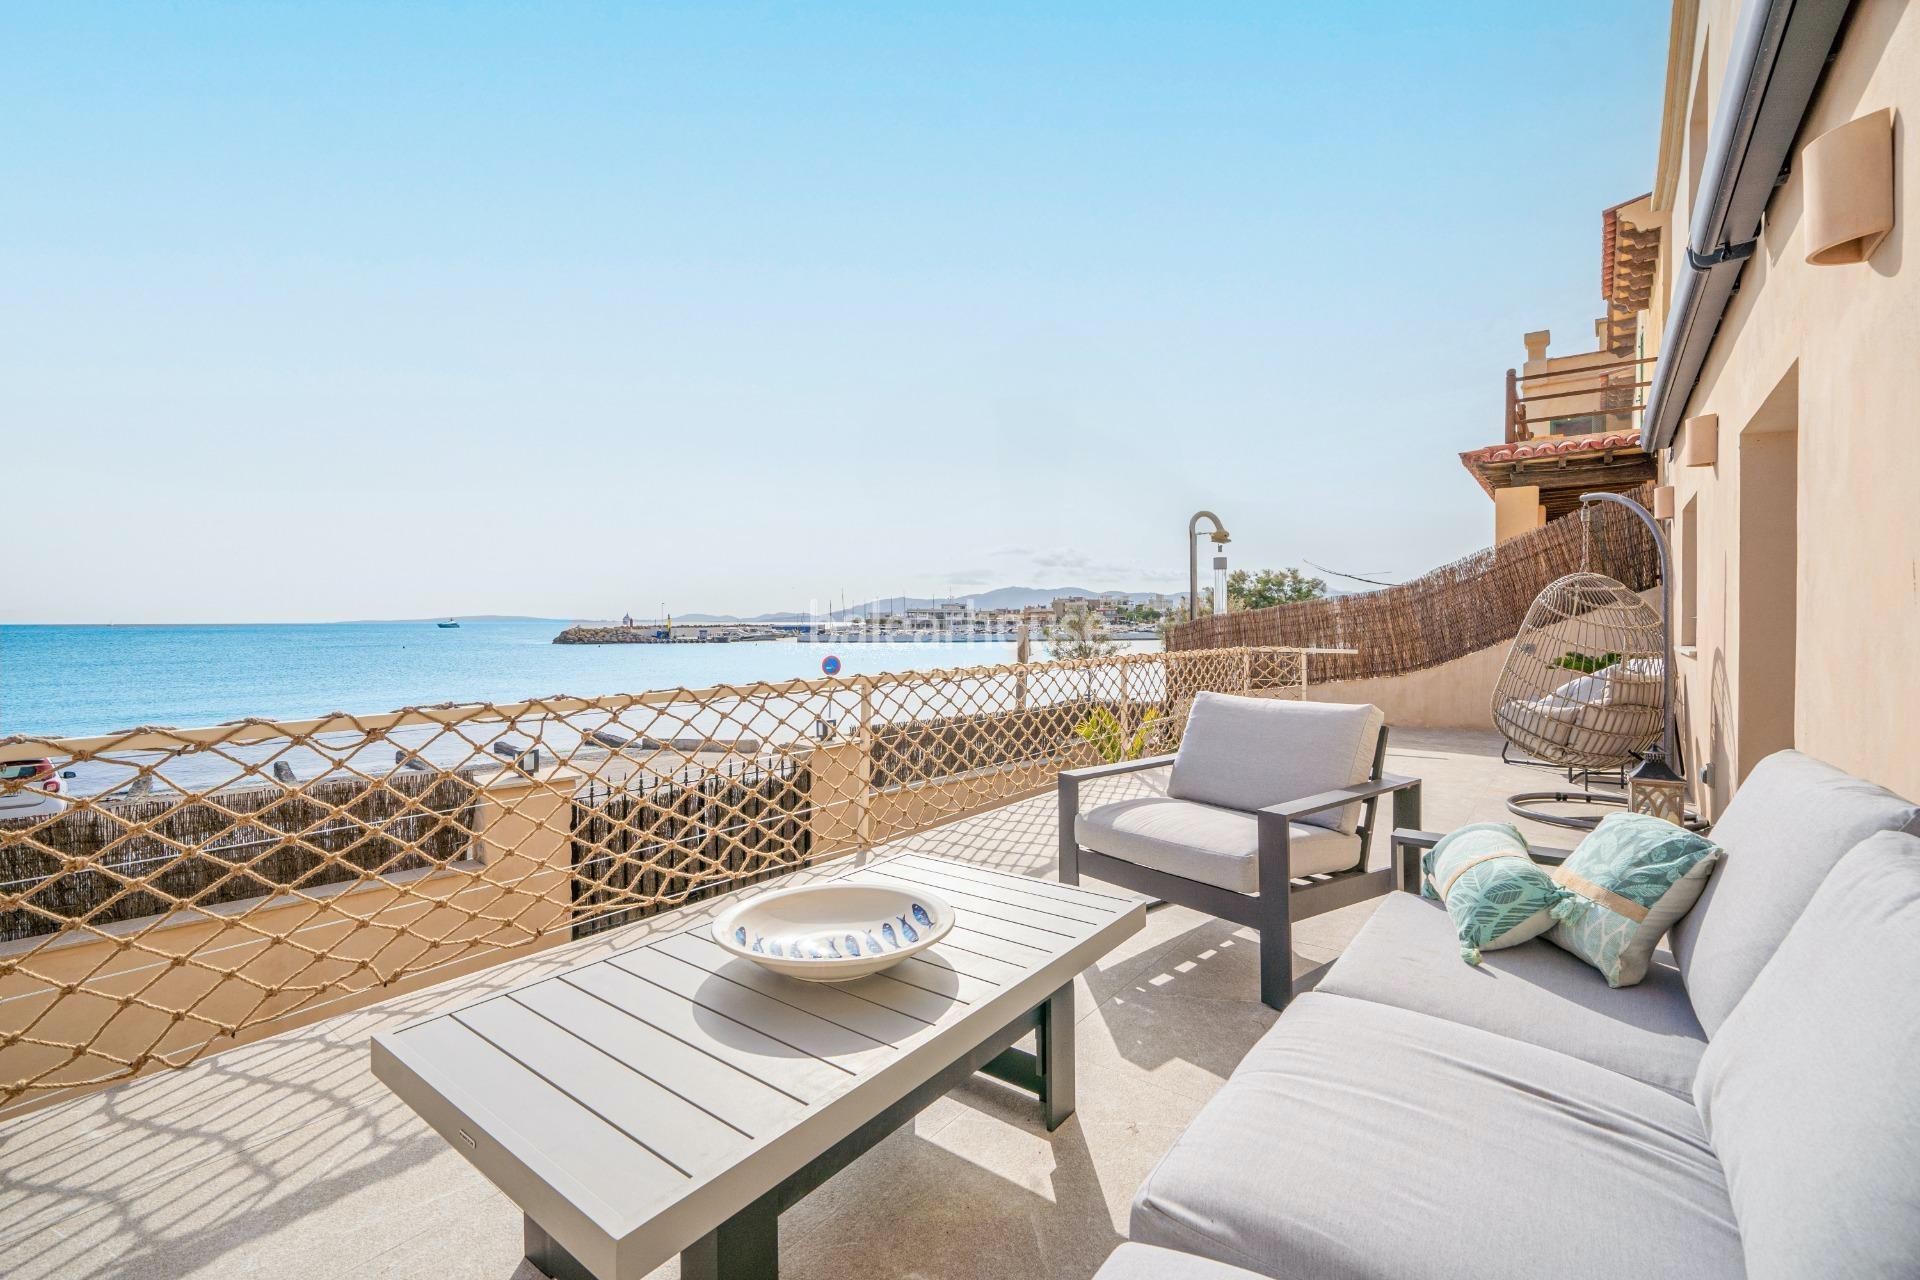 Fabulous Moderna beachfront villa with terraces large garden and swimming pool on the Costa de Palma